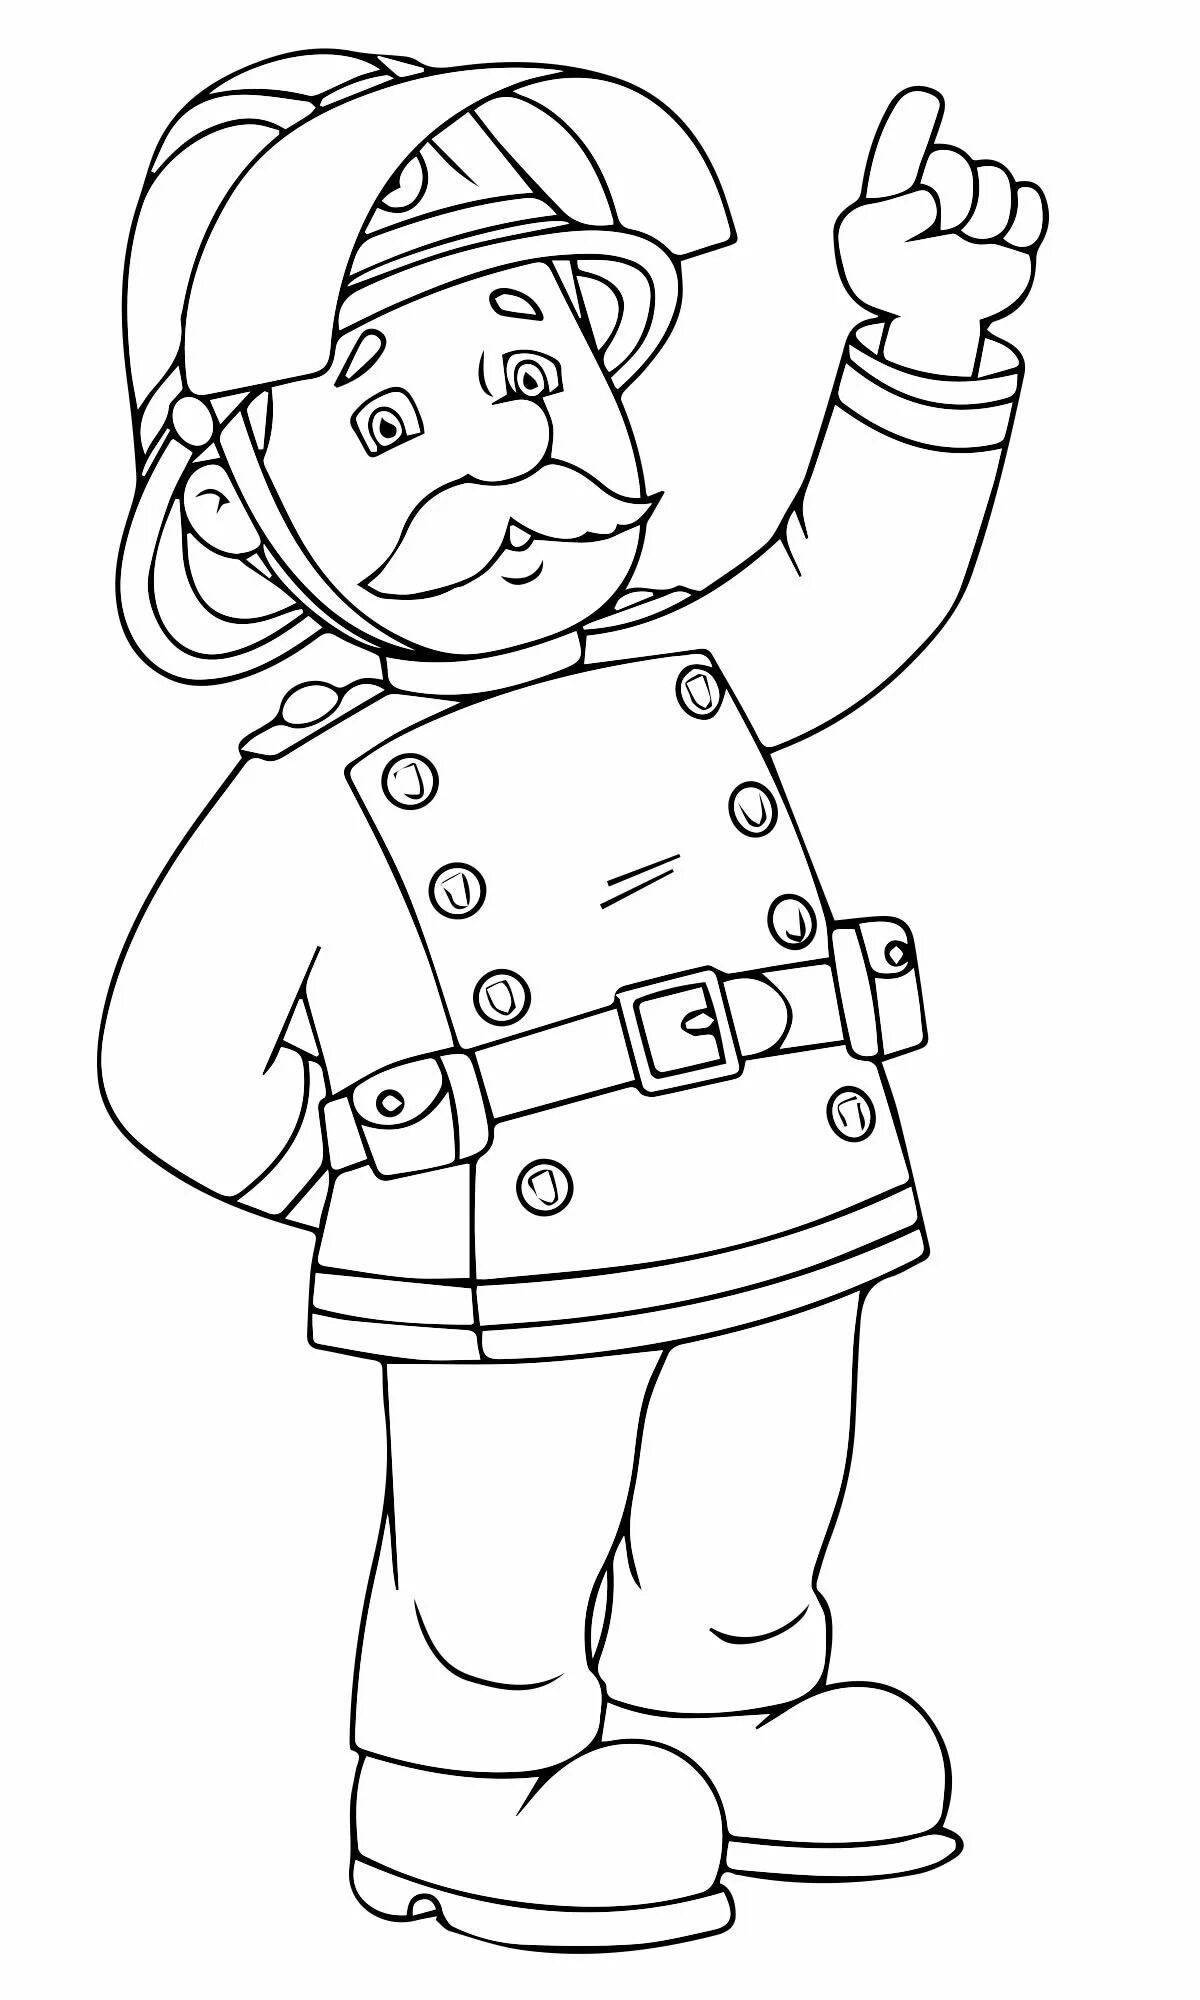 Outstanding fireman coloring pages for kids